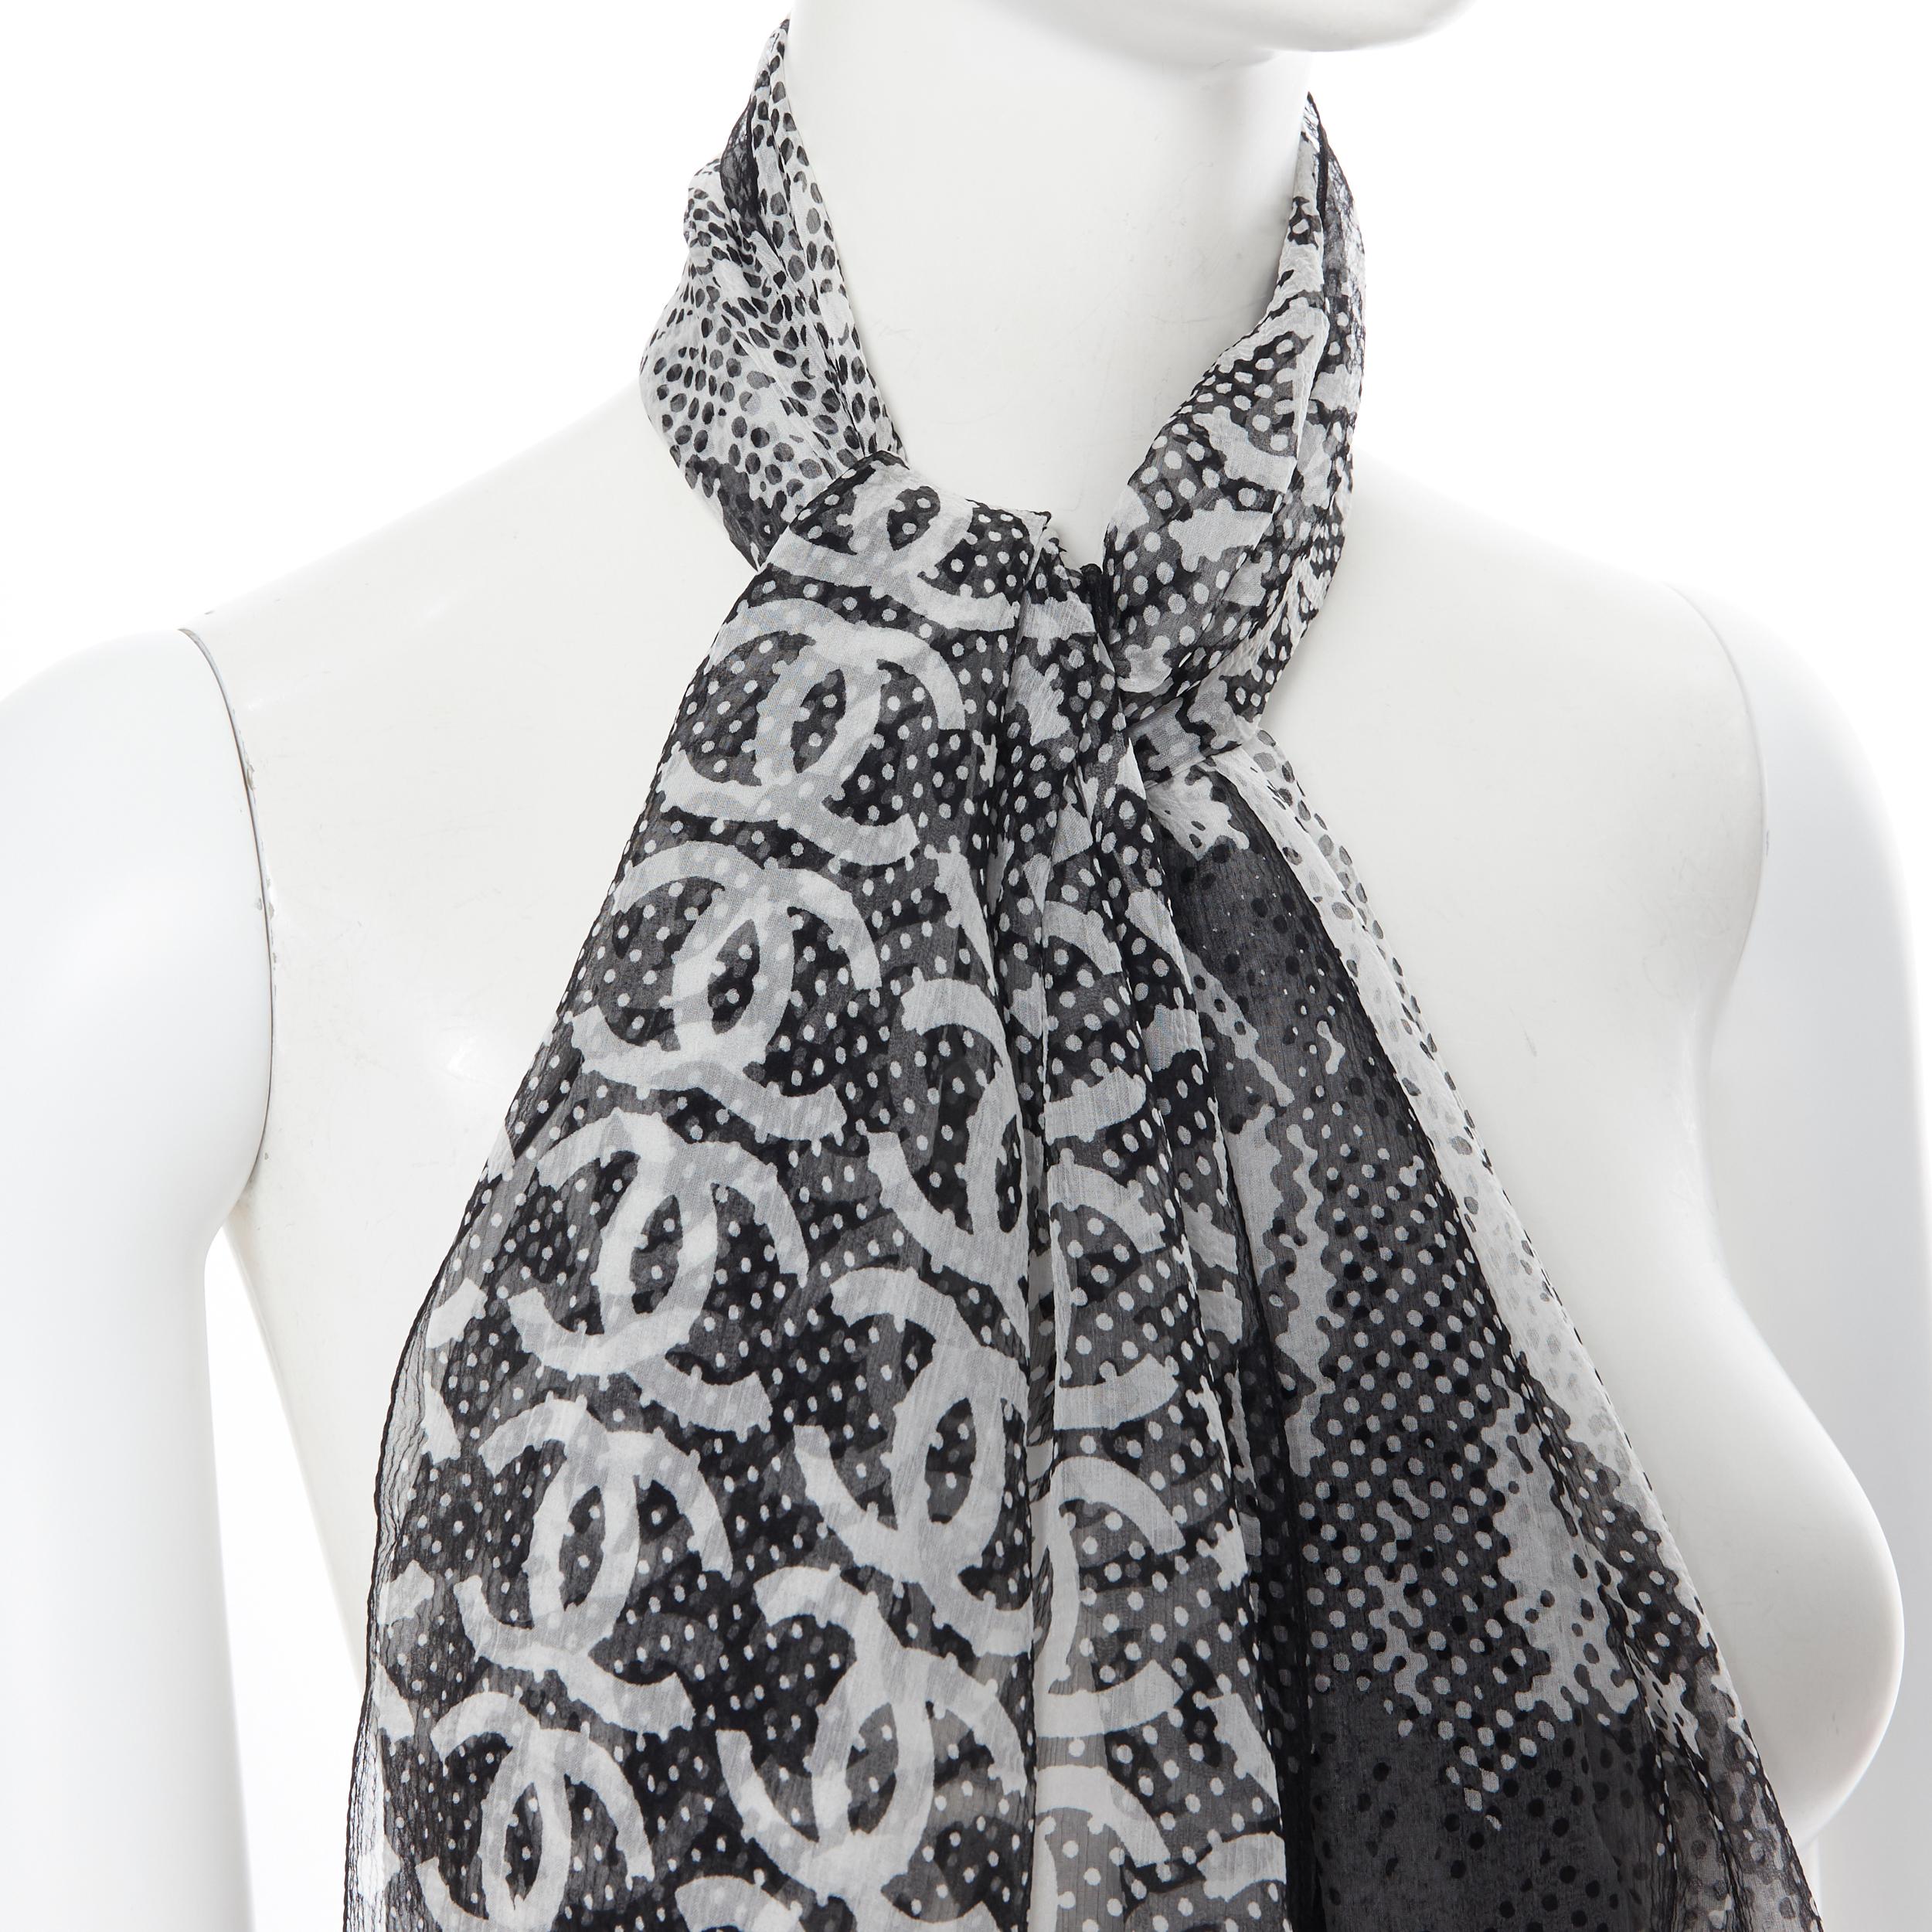 CHANEL 100% silk black white logo monogram scarf
Brand: Chanel
Model Name / Style: Silk scarf
Material: Silk
Color: Black
Pattern: Abstract
Extra Detail: 100% silk. Black white CC monogram print.
Made in: Italy

CONDITION: 
Condition: Excellent,